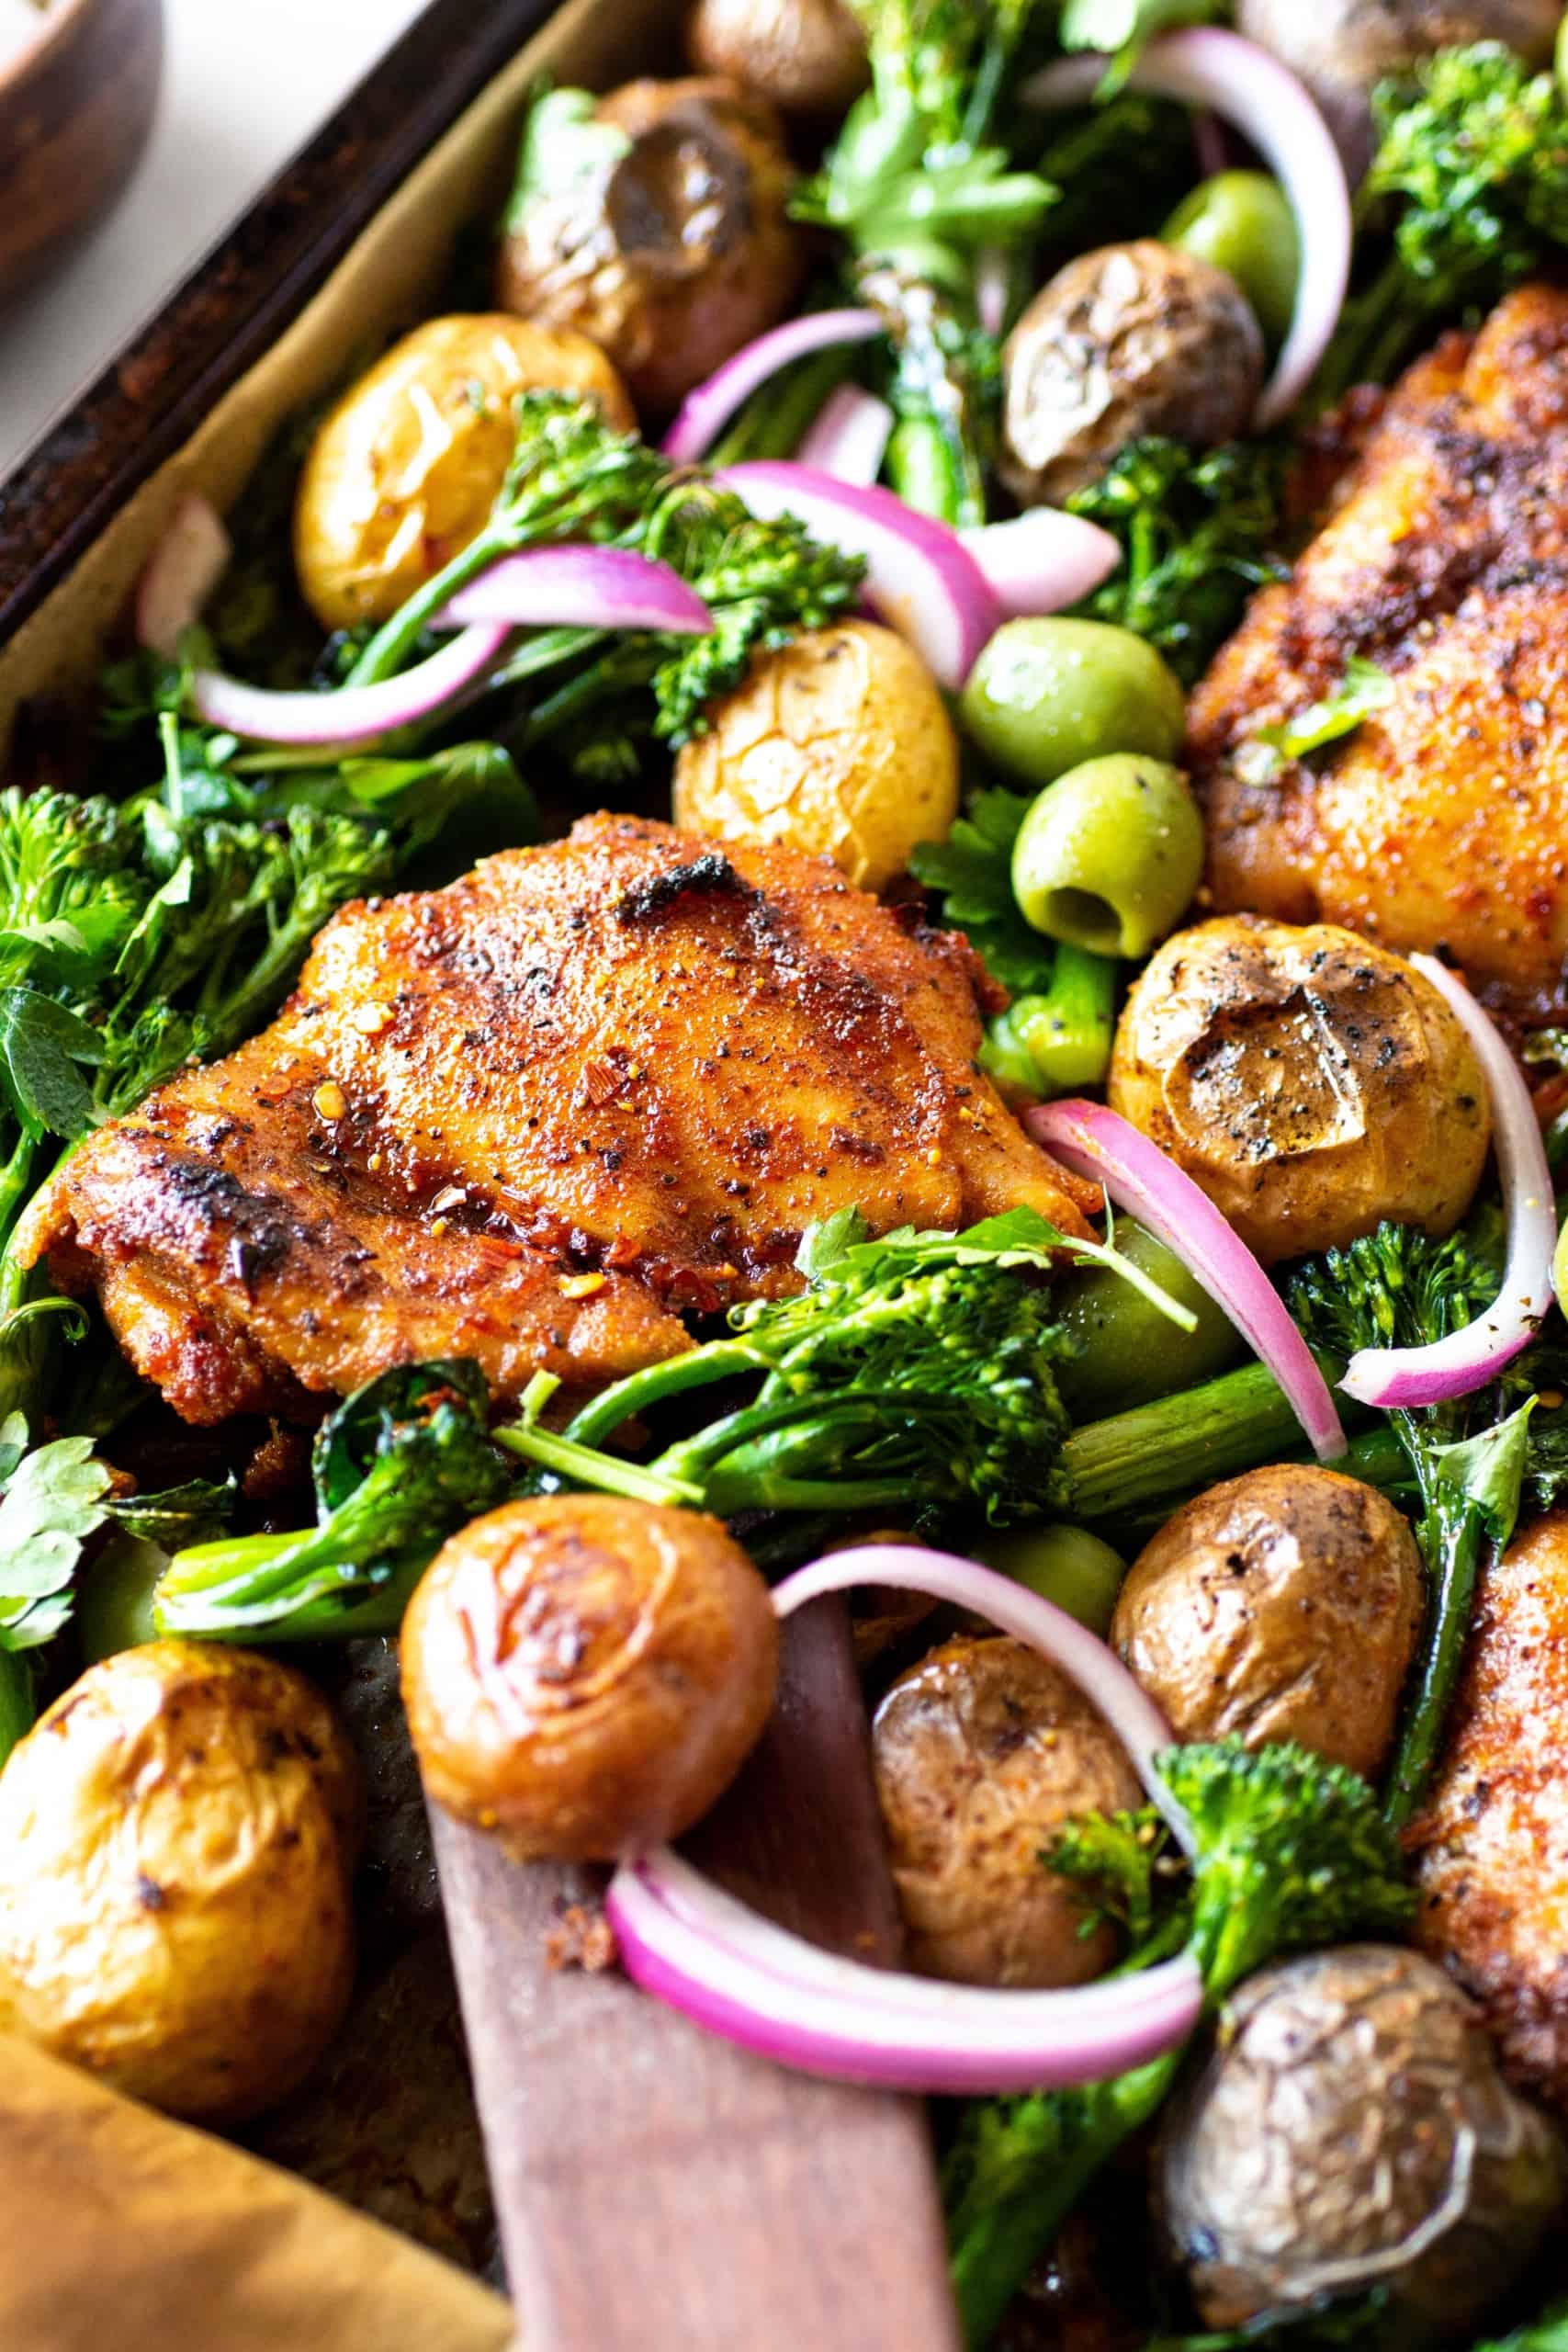 A pan full of gluten-free chicken, potatoes and green onions.